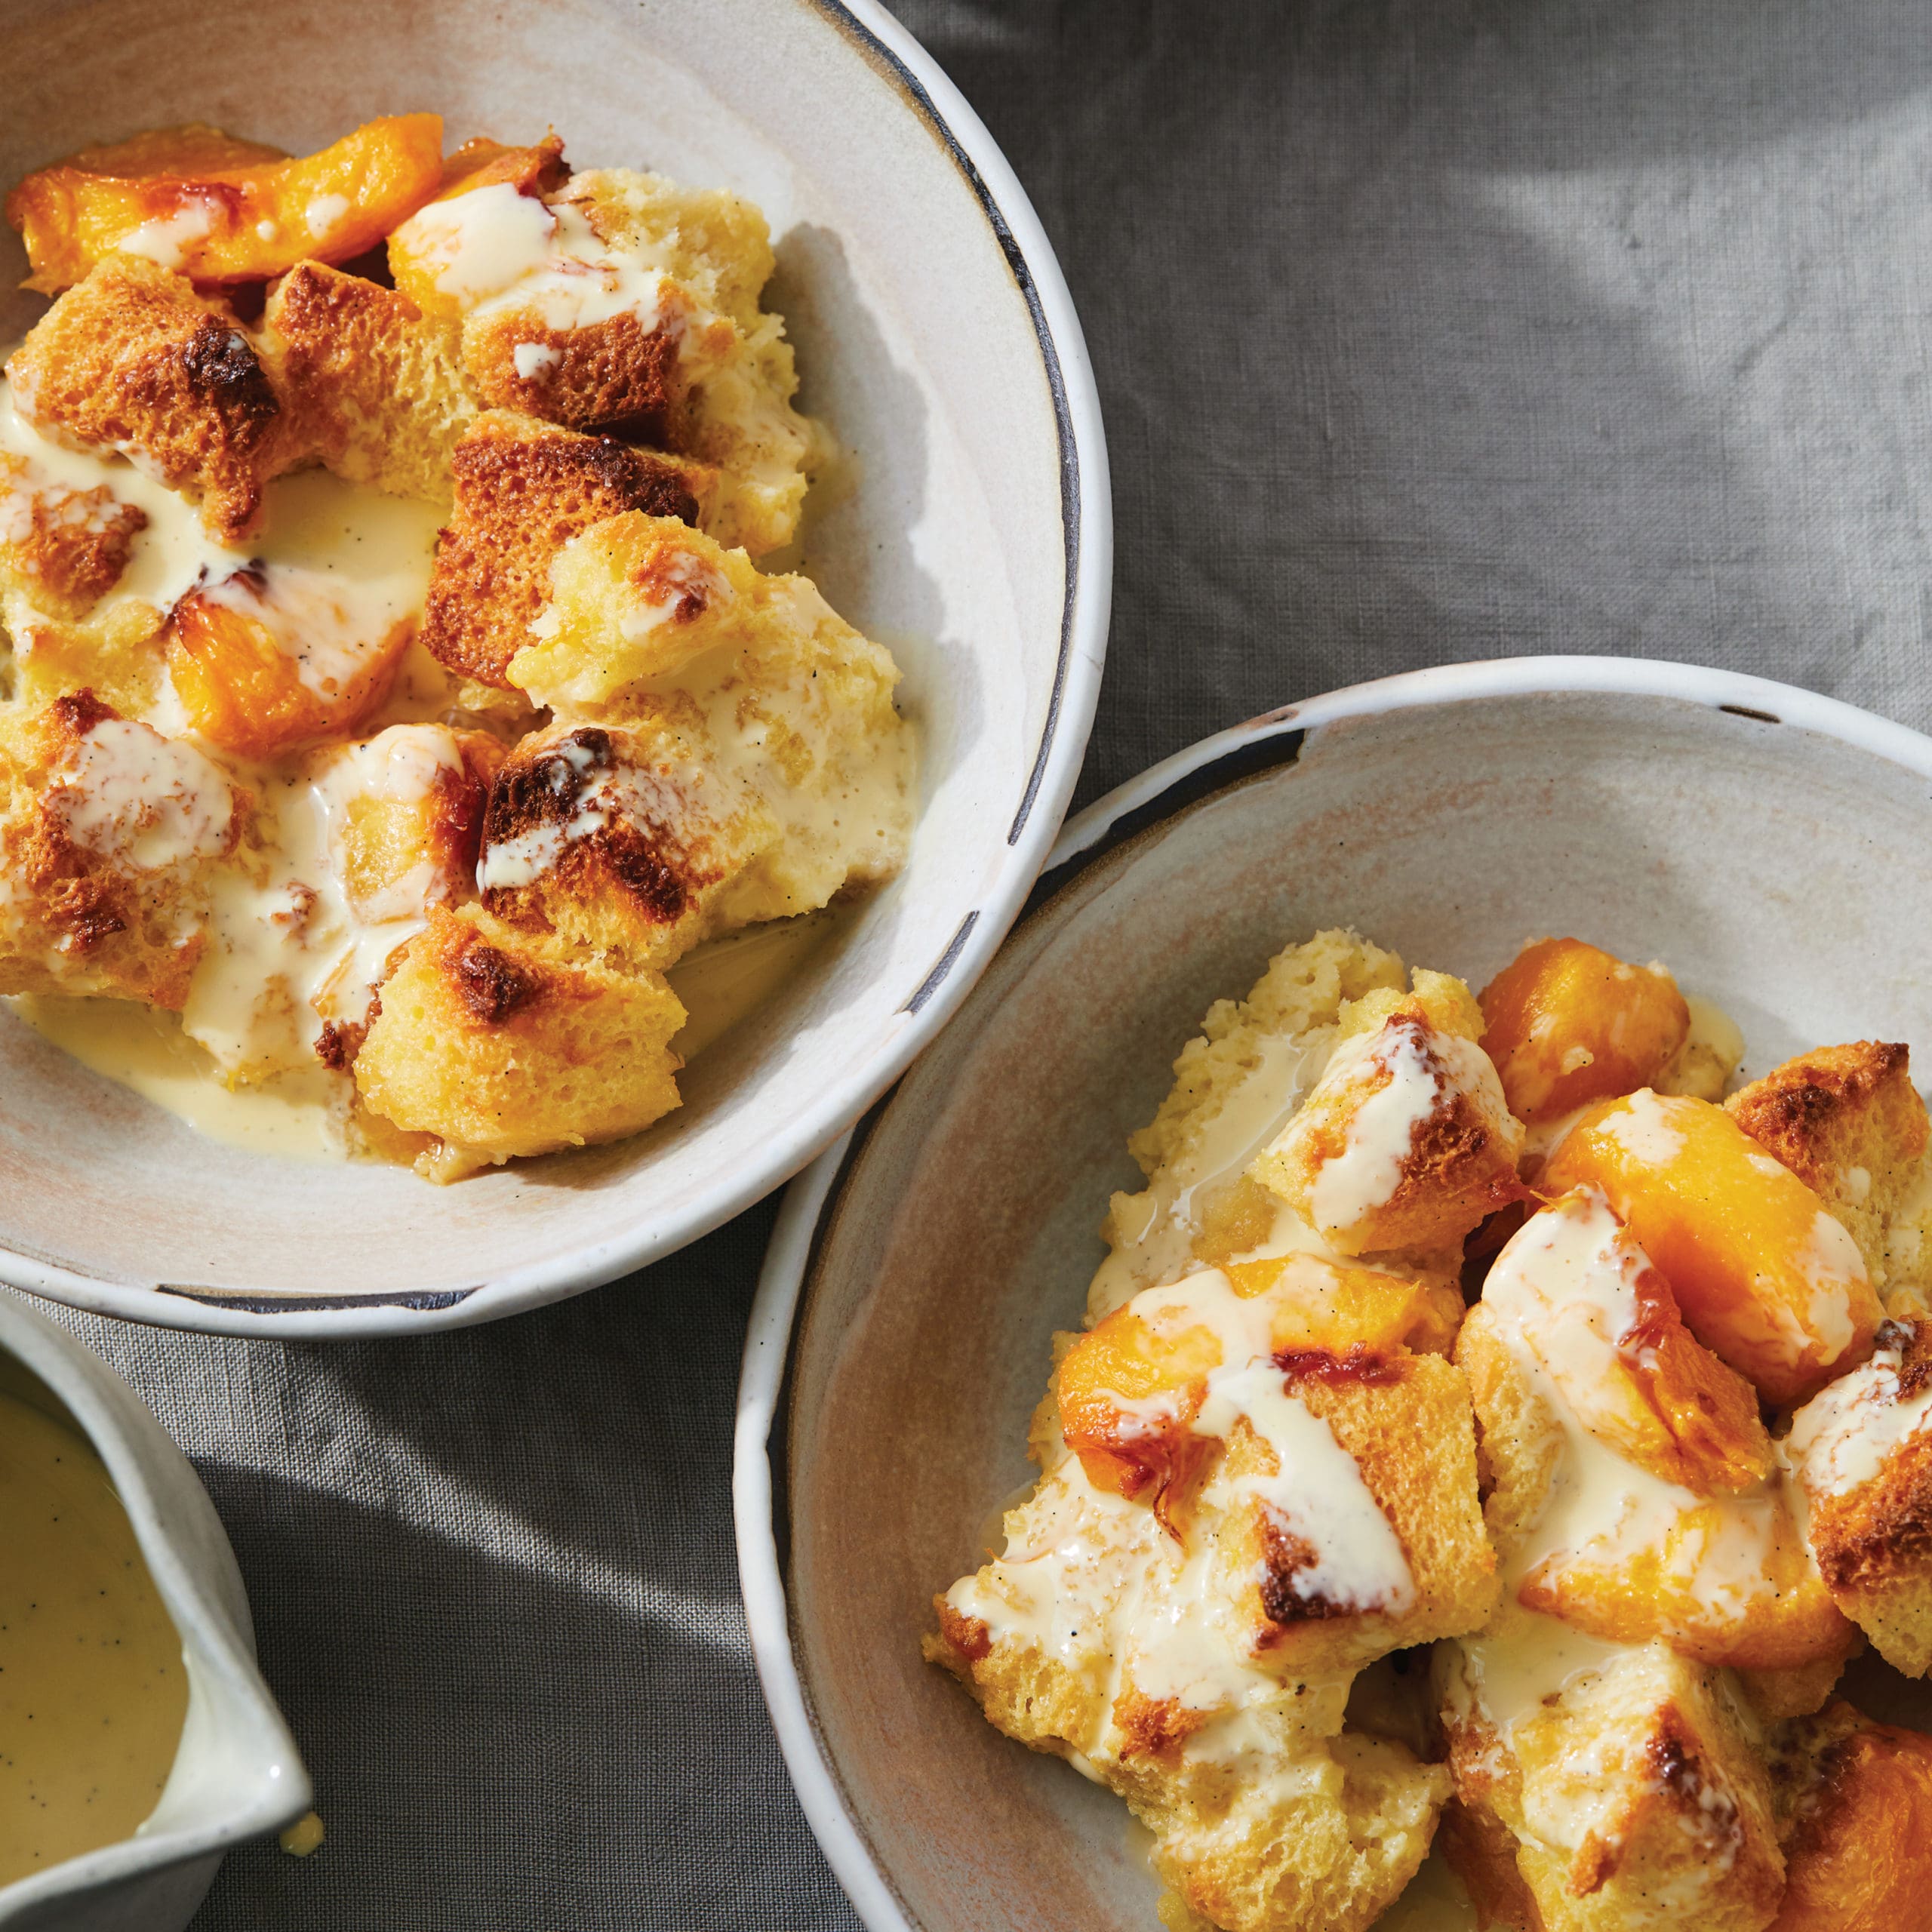 Roasted Peach Bread Pudding recipe from Simple Fruit